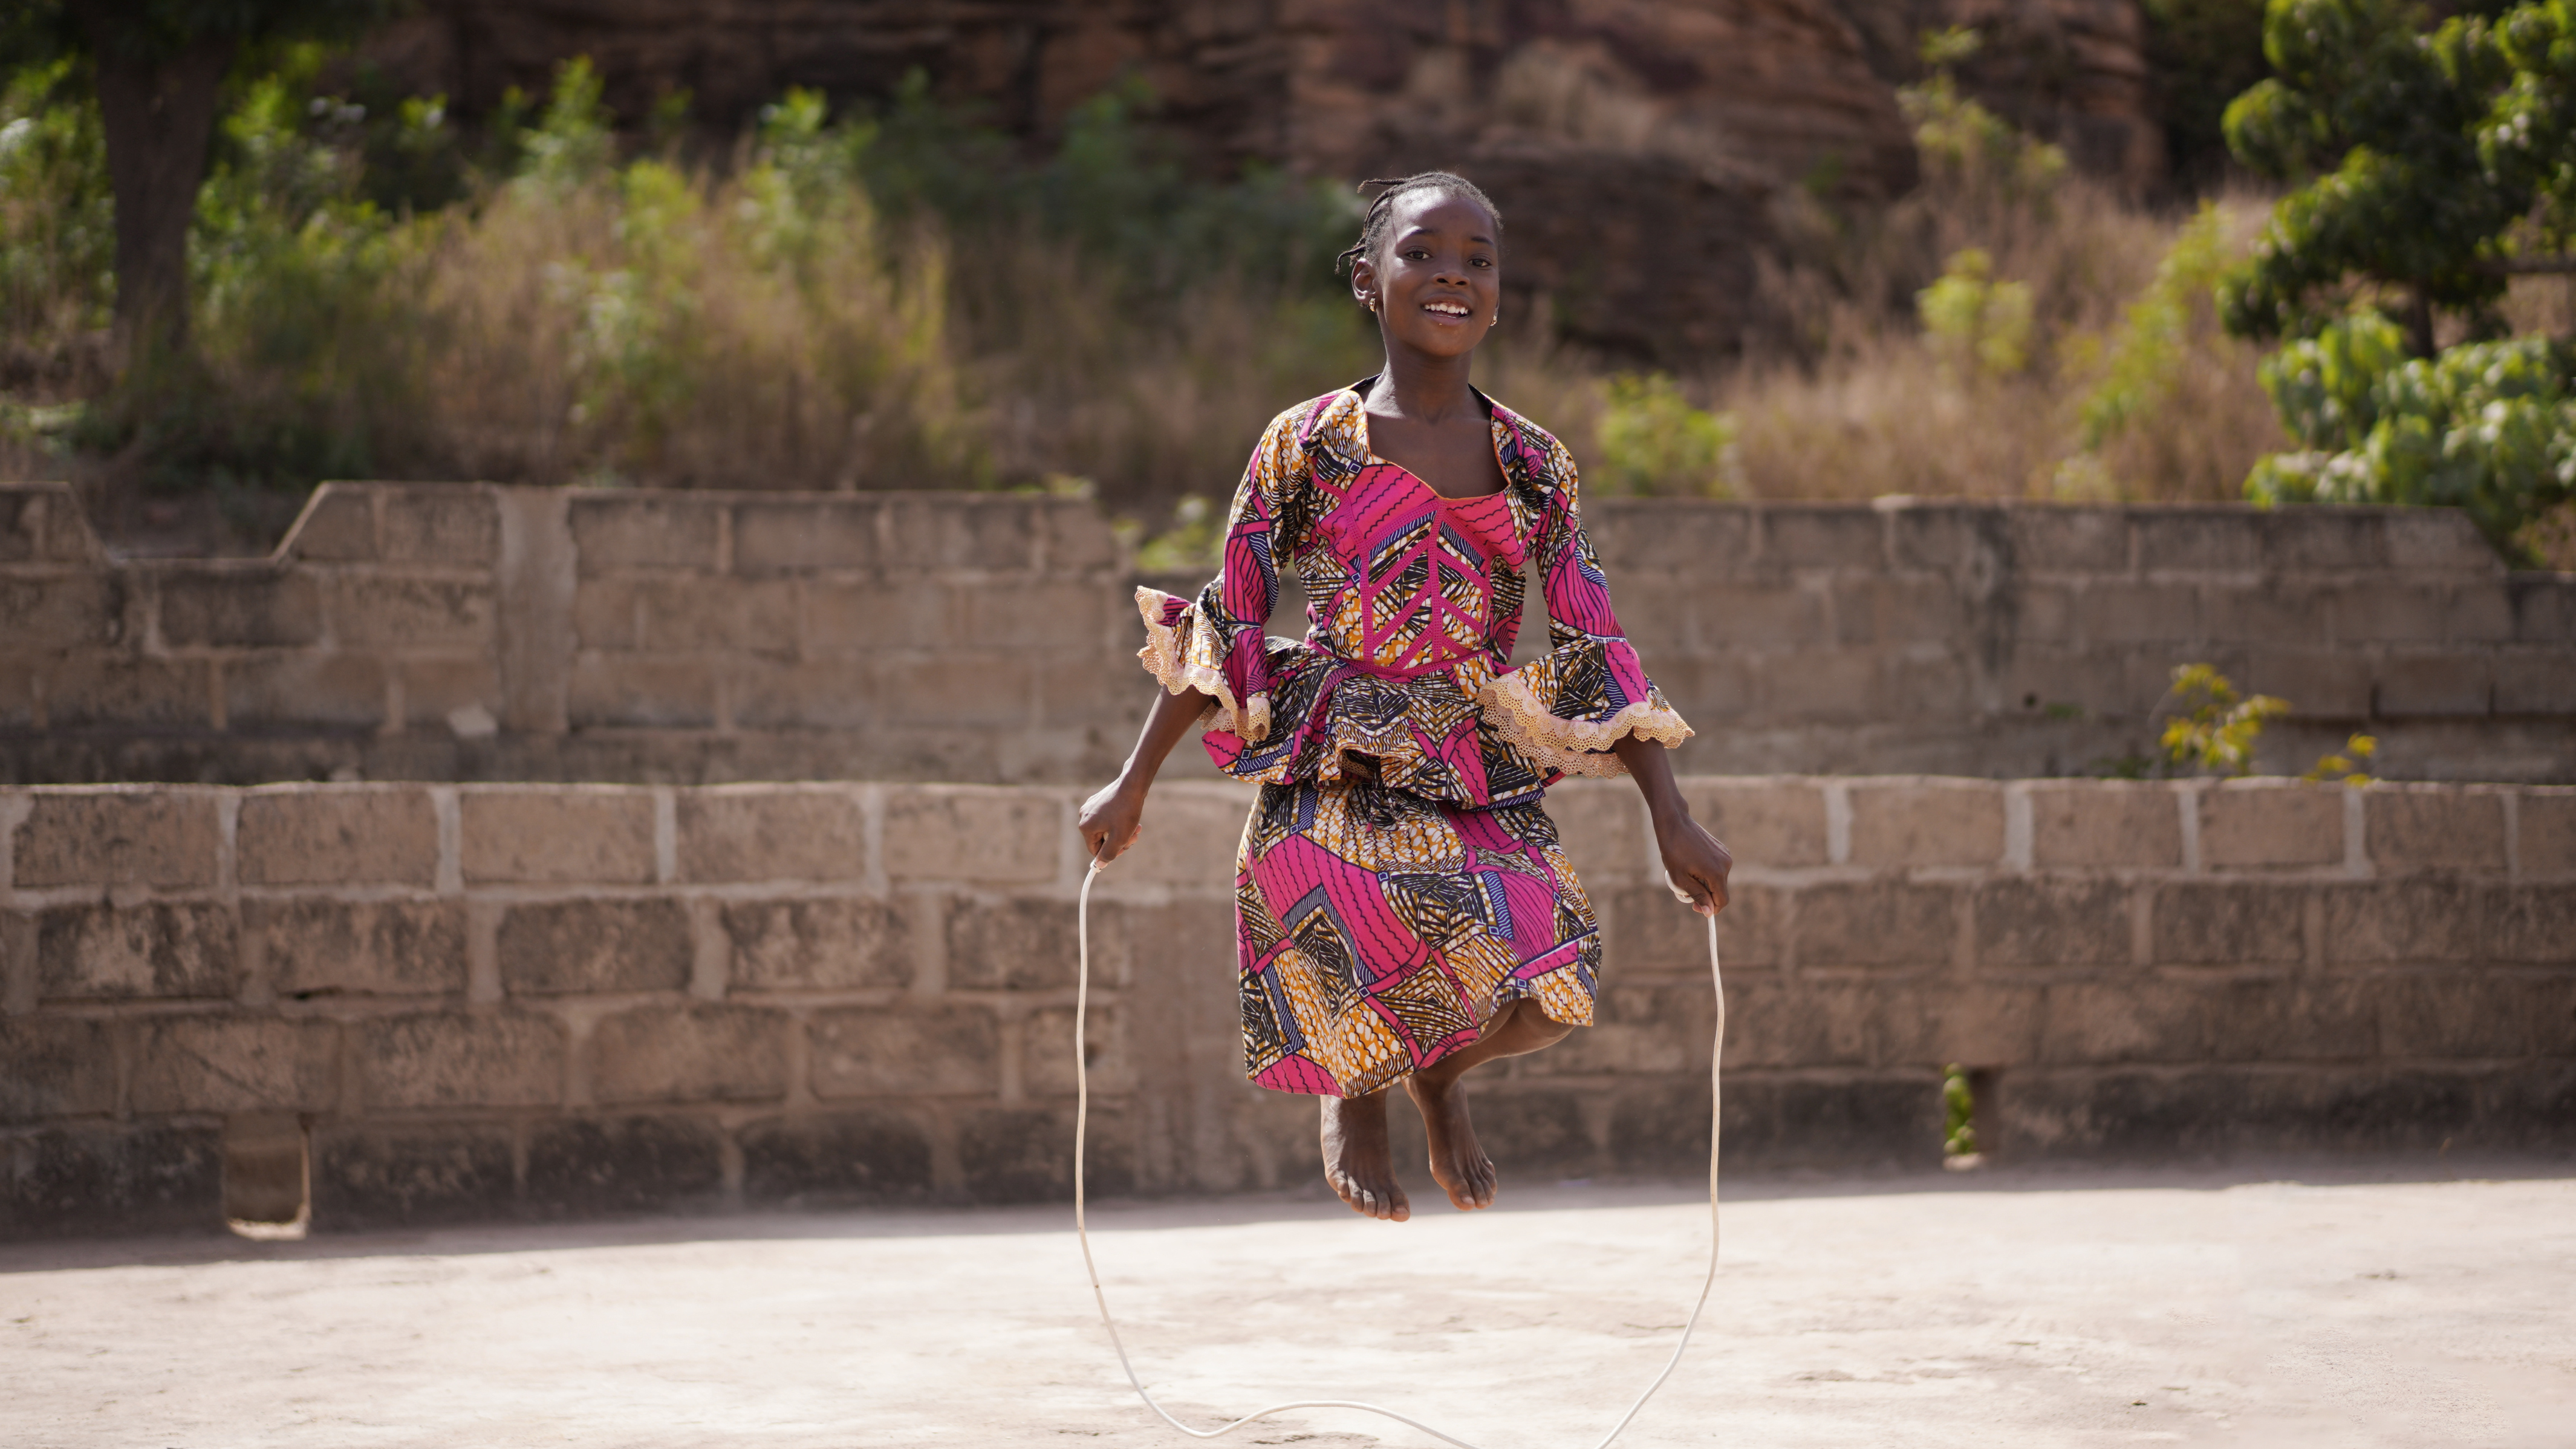 Young girl jumping with rope